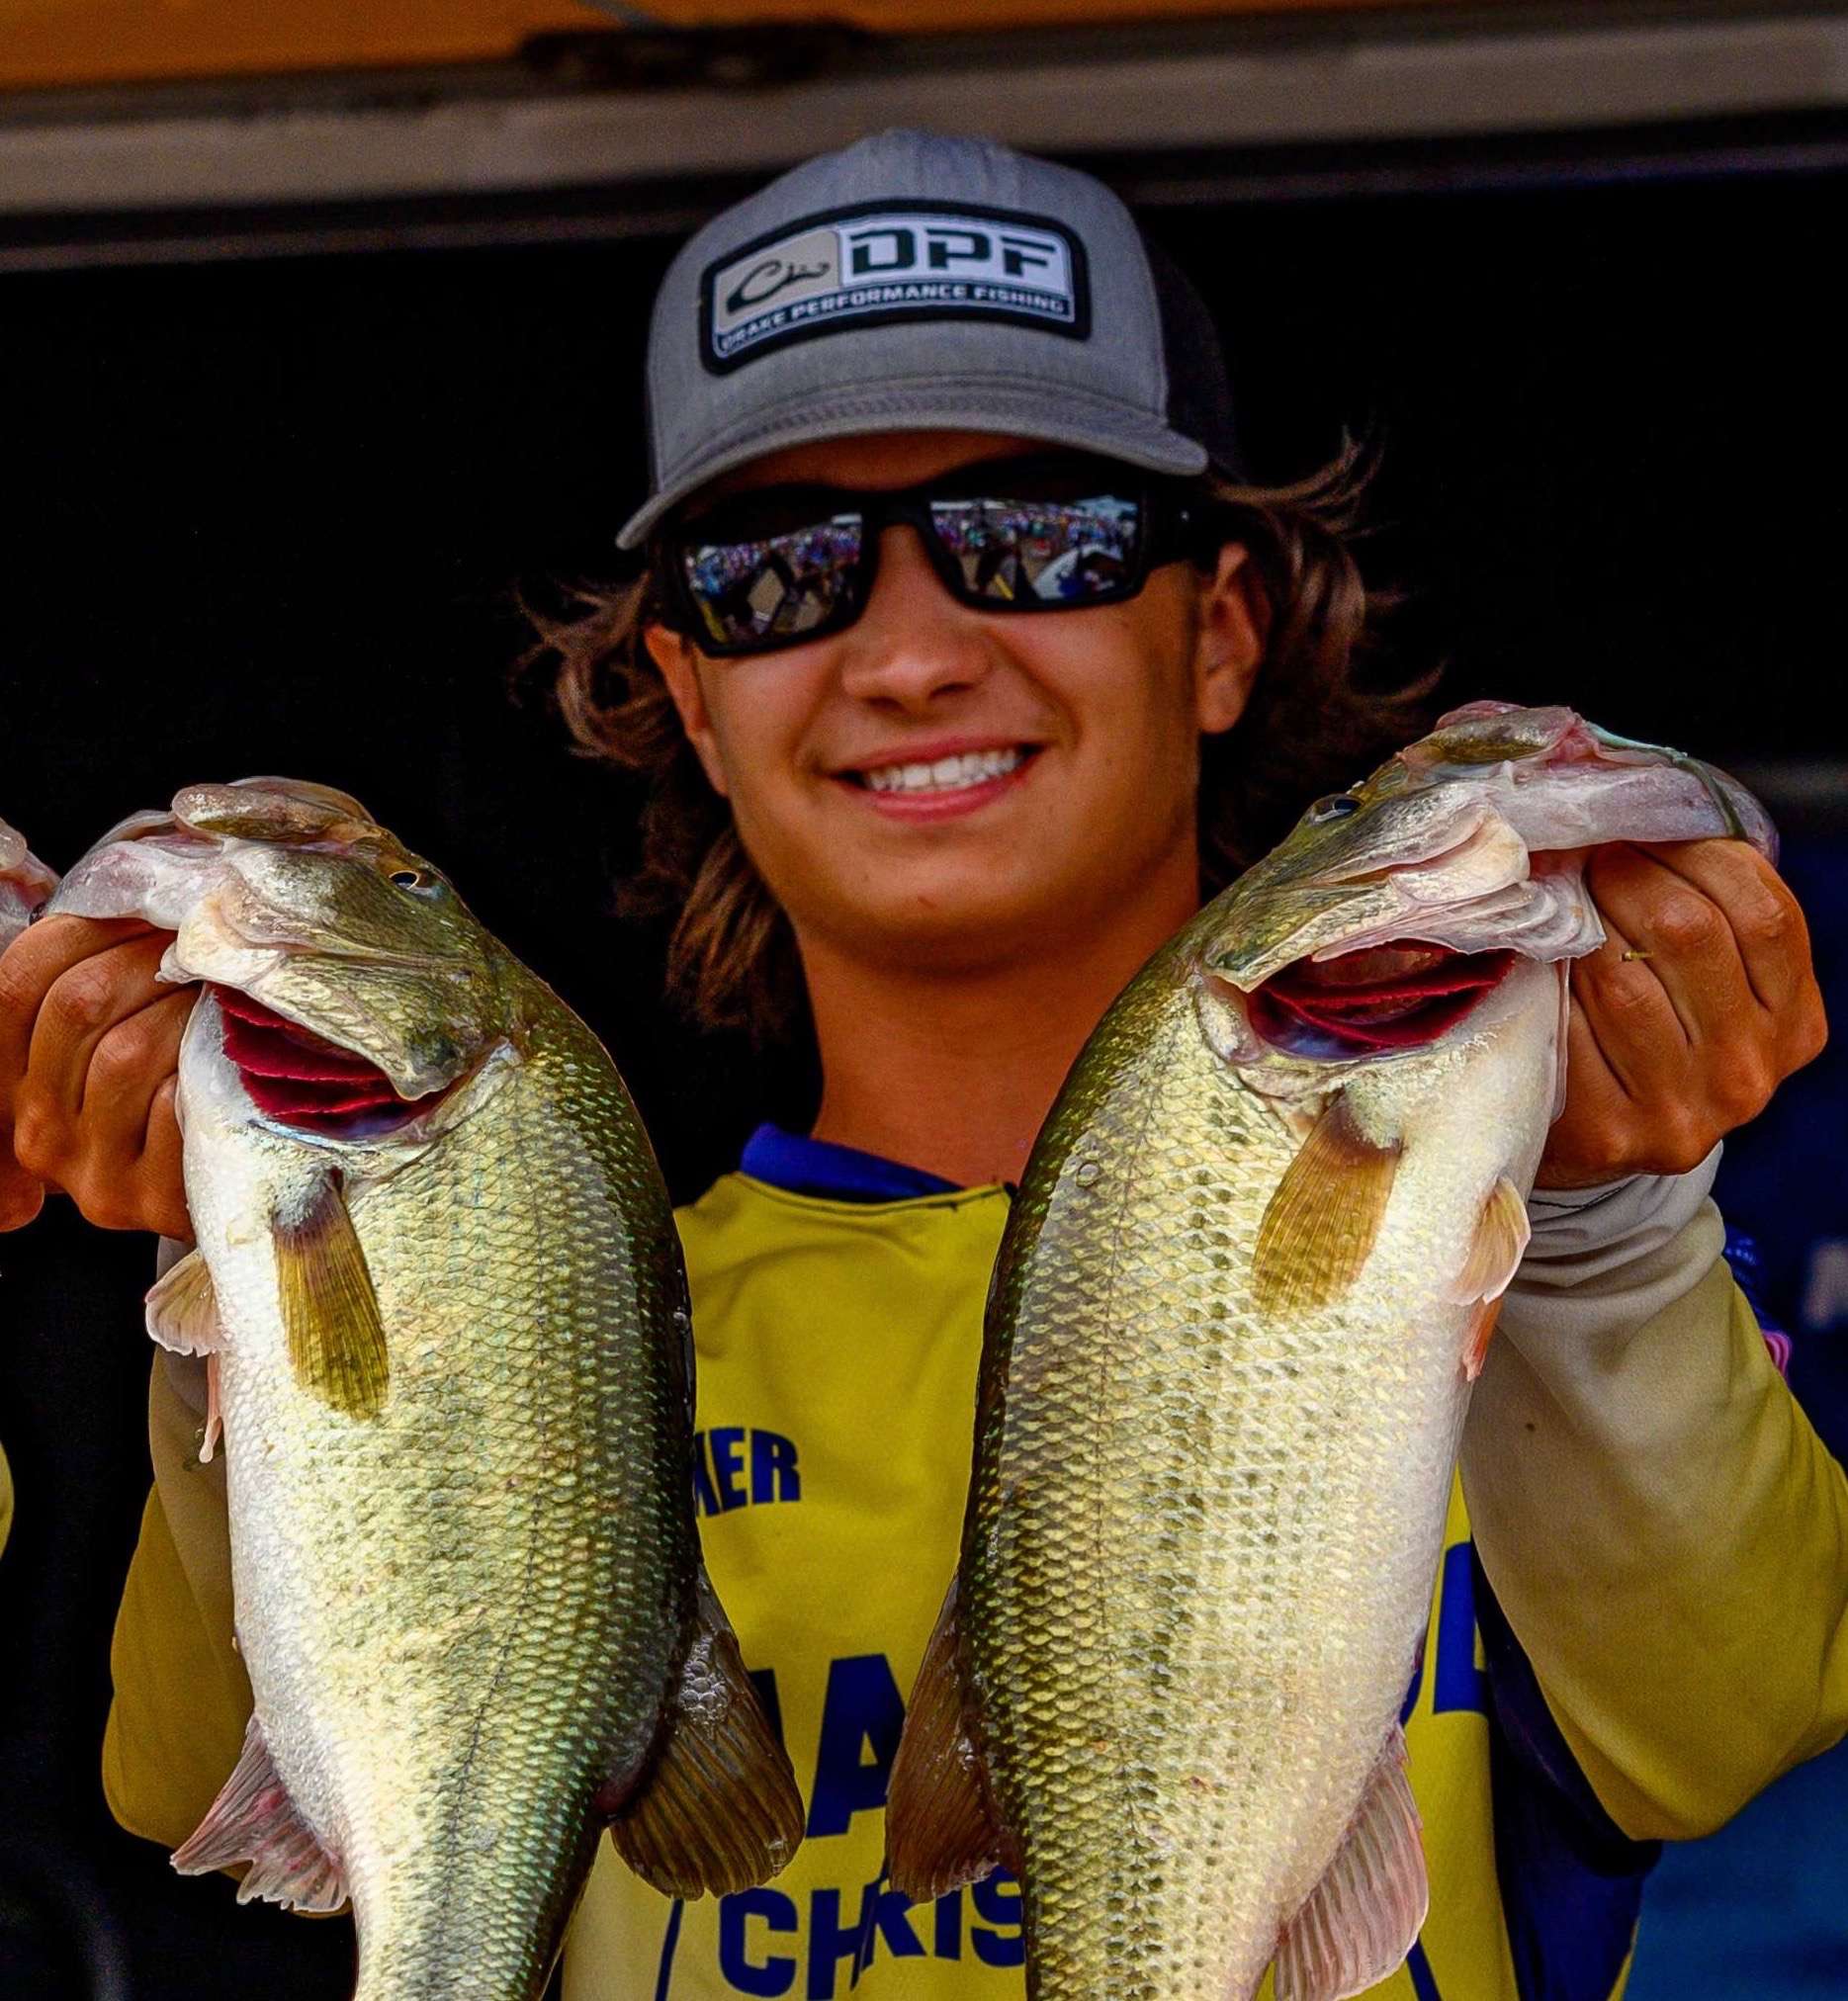 <b>Tucker Smith, Shoal Creek, Ala. </b><br> A senior at Briarwood Christian School, Smith holds one big tournament win this season, capturing first place on a 300-boat field at the B.A.S.S. High School National Championship on Kentucky Lake. Smith has also earned eight Top 5 finishes and ten Top 20 finishes this tournament season. Smith is a back-to-back B.A.S.S. High School National Champion as well as a 2019 B.A.S.S. High School All-American.   <p> âAt almost every weigh-in, anglers from other schools look to see how they finished compared to the âback-to back national championâ and I am so thrilled to see how complimentary and humble Tucker is in that role,â said Jay Matthews, Director of Athletics at Briarwood Christian School. âHe has had great finishes since that designation and also had tough tournaments. Regardless, Tucker handles it with class and genuine interest in others.â  <p> Smith is captain of the Briarwood Bass Fishing Team and has led his team in both fishing and conservation work building habitats on Lake Caroline in South Alabama. Tucker has worked with Randy Howellâs Kingâs Home Project to take children at Kingâs Home fishing for a day and has reached out to Alabama Veteran with an offer to do the same for some of their members.   